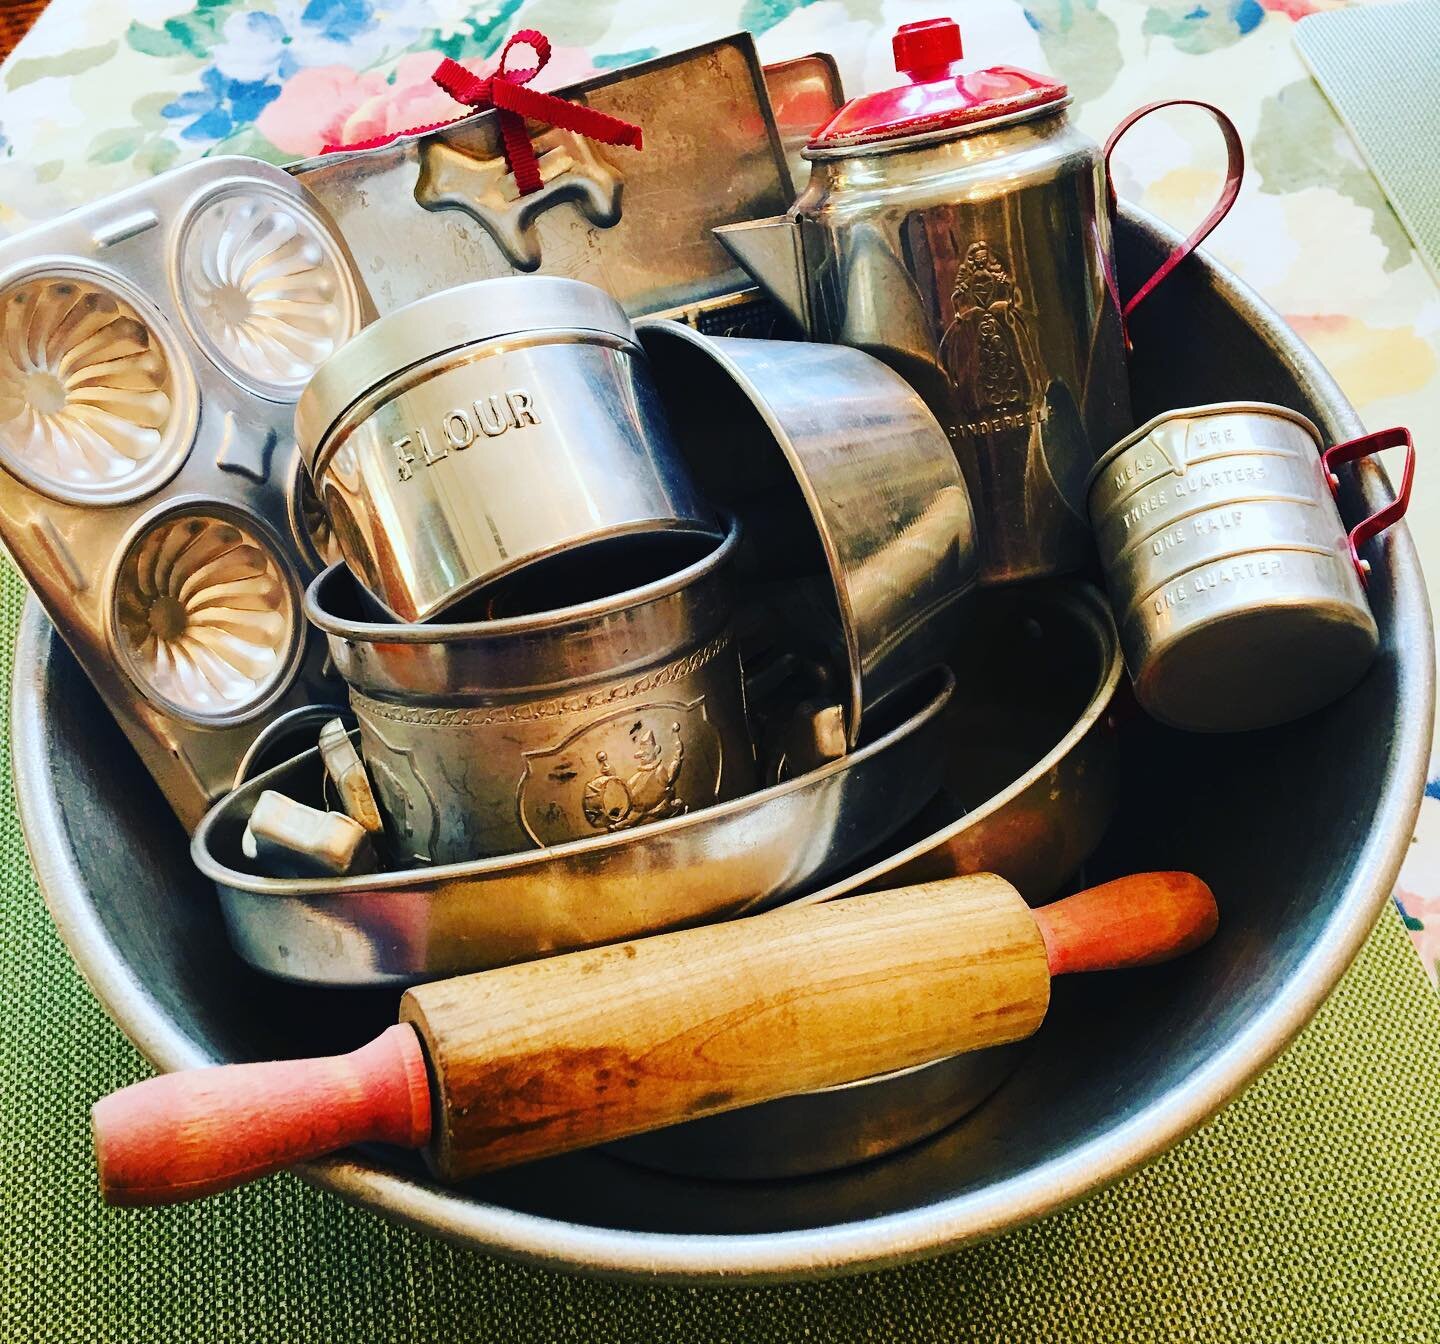 Collected miniature cooking implements in a handed down vintage mixing bowl used for &ldquo;snow ice cream&rdquo; #tinytreasures #childhoodmemories #alwaysacollector #antiquetoys #snowicecream